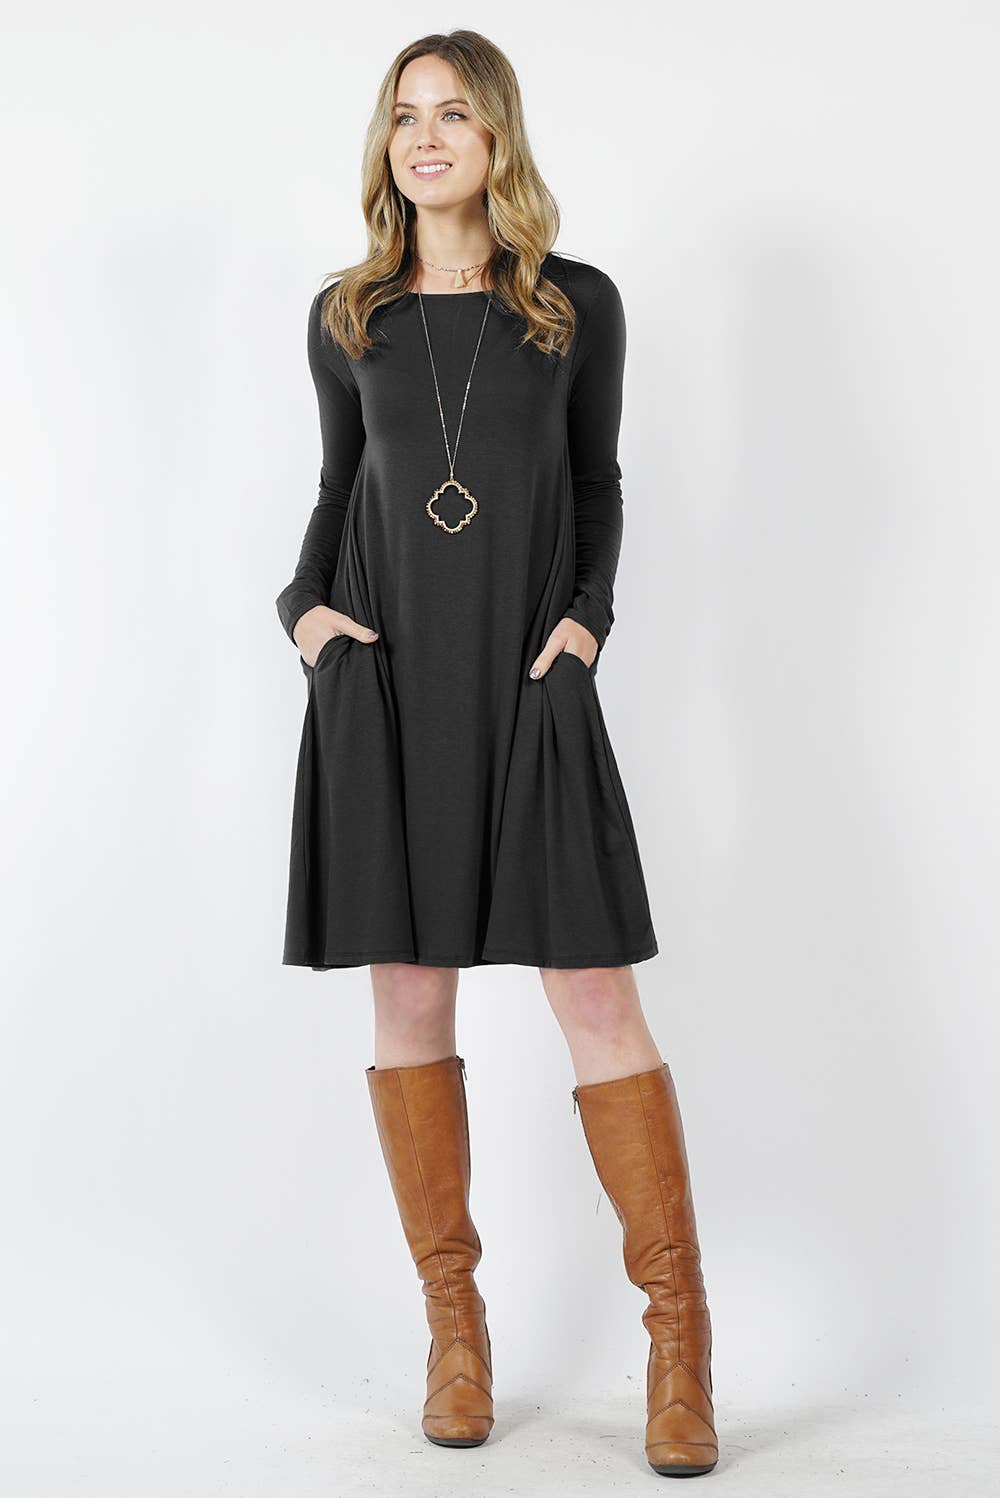 Flare Dress - Long Sleeve with Pockets (Black)